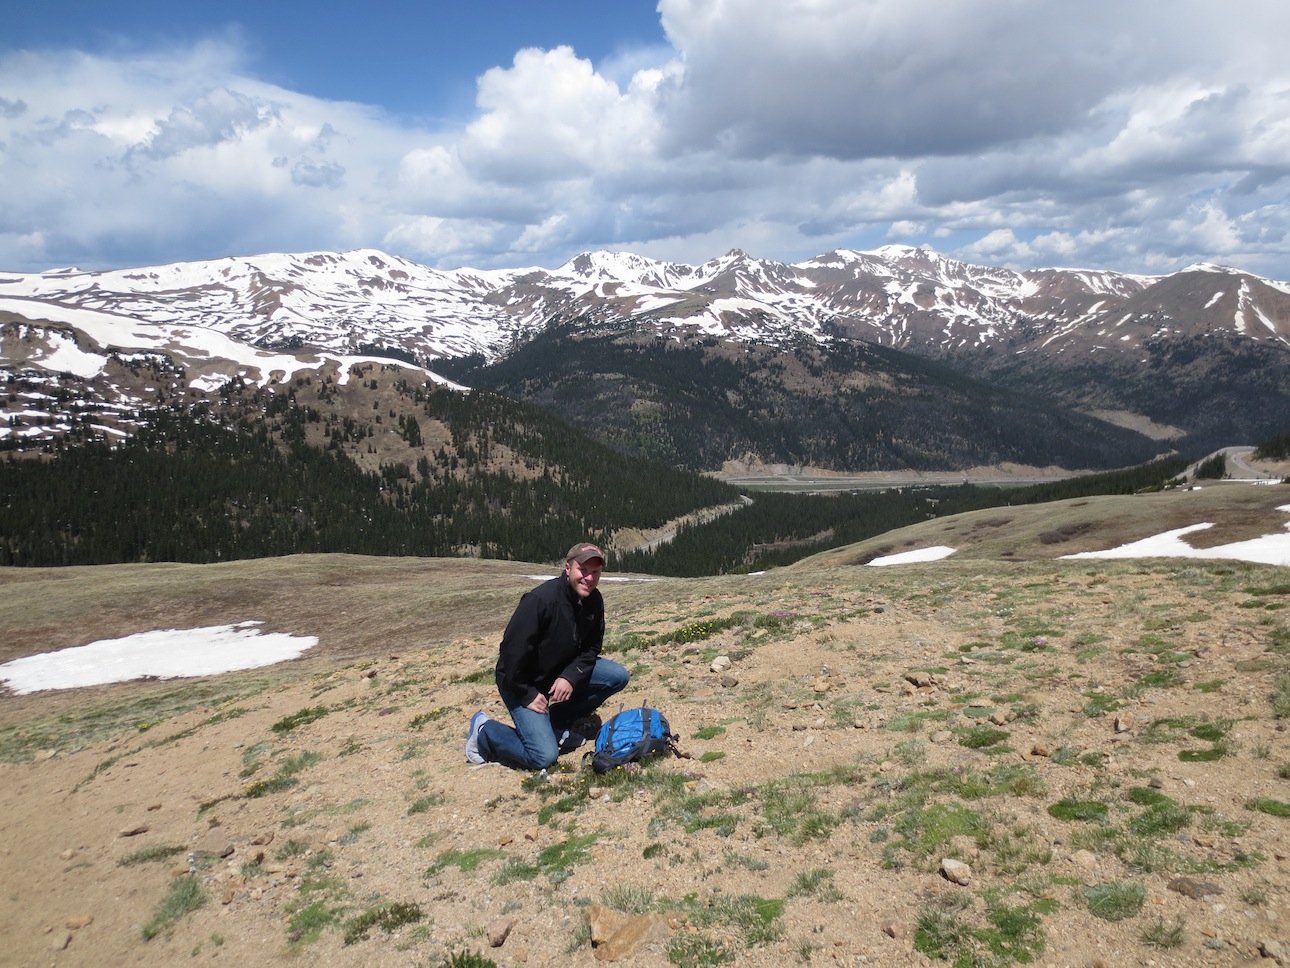 Matt Makai kneeling in front of snow capped mountains in the distance.